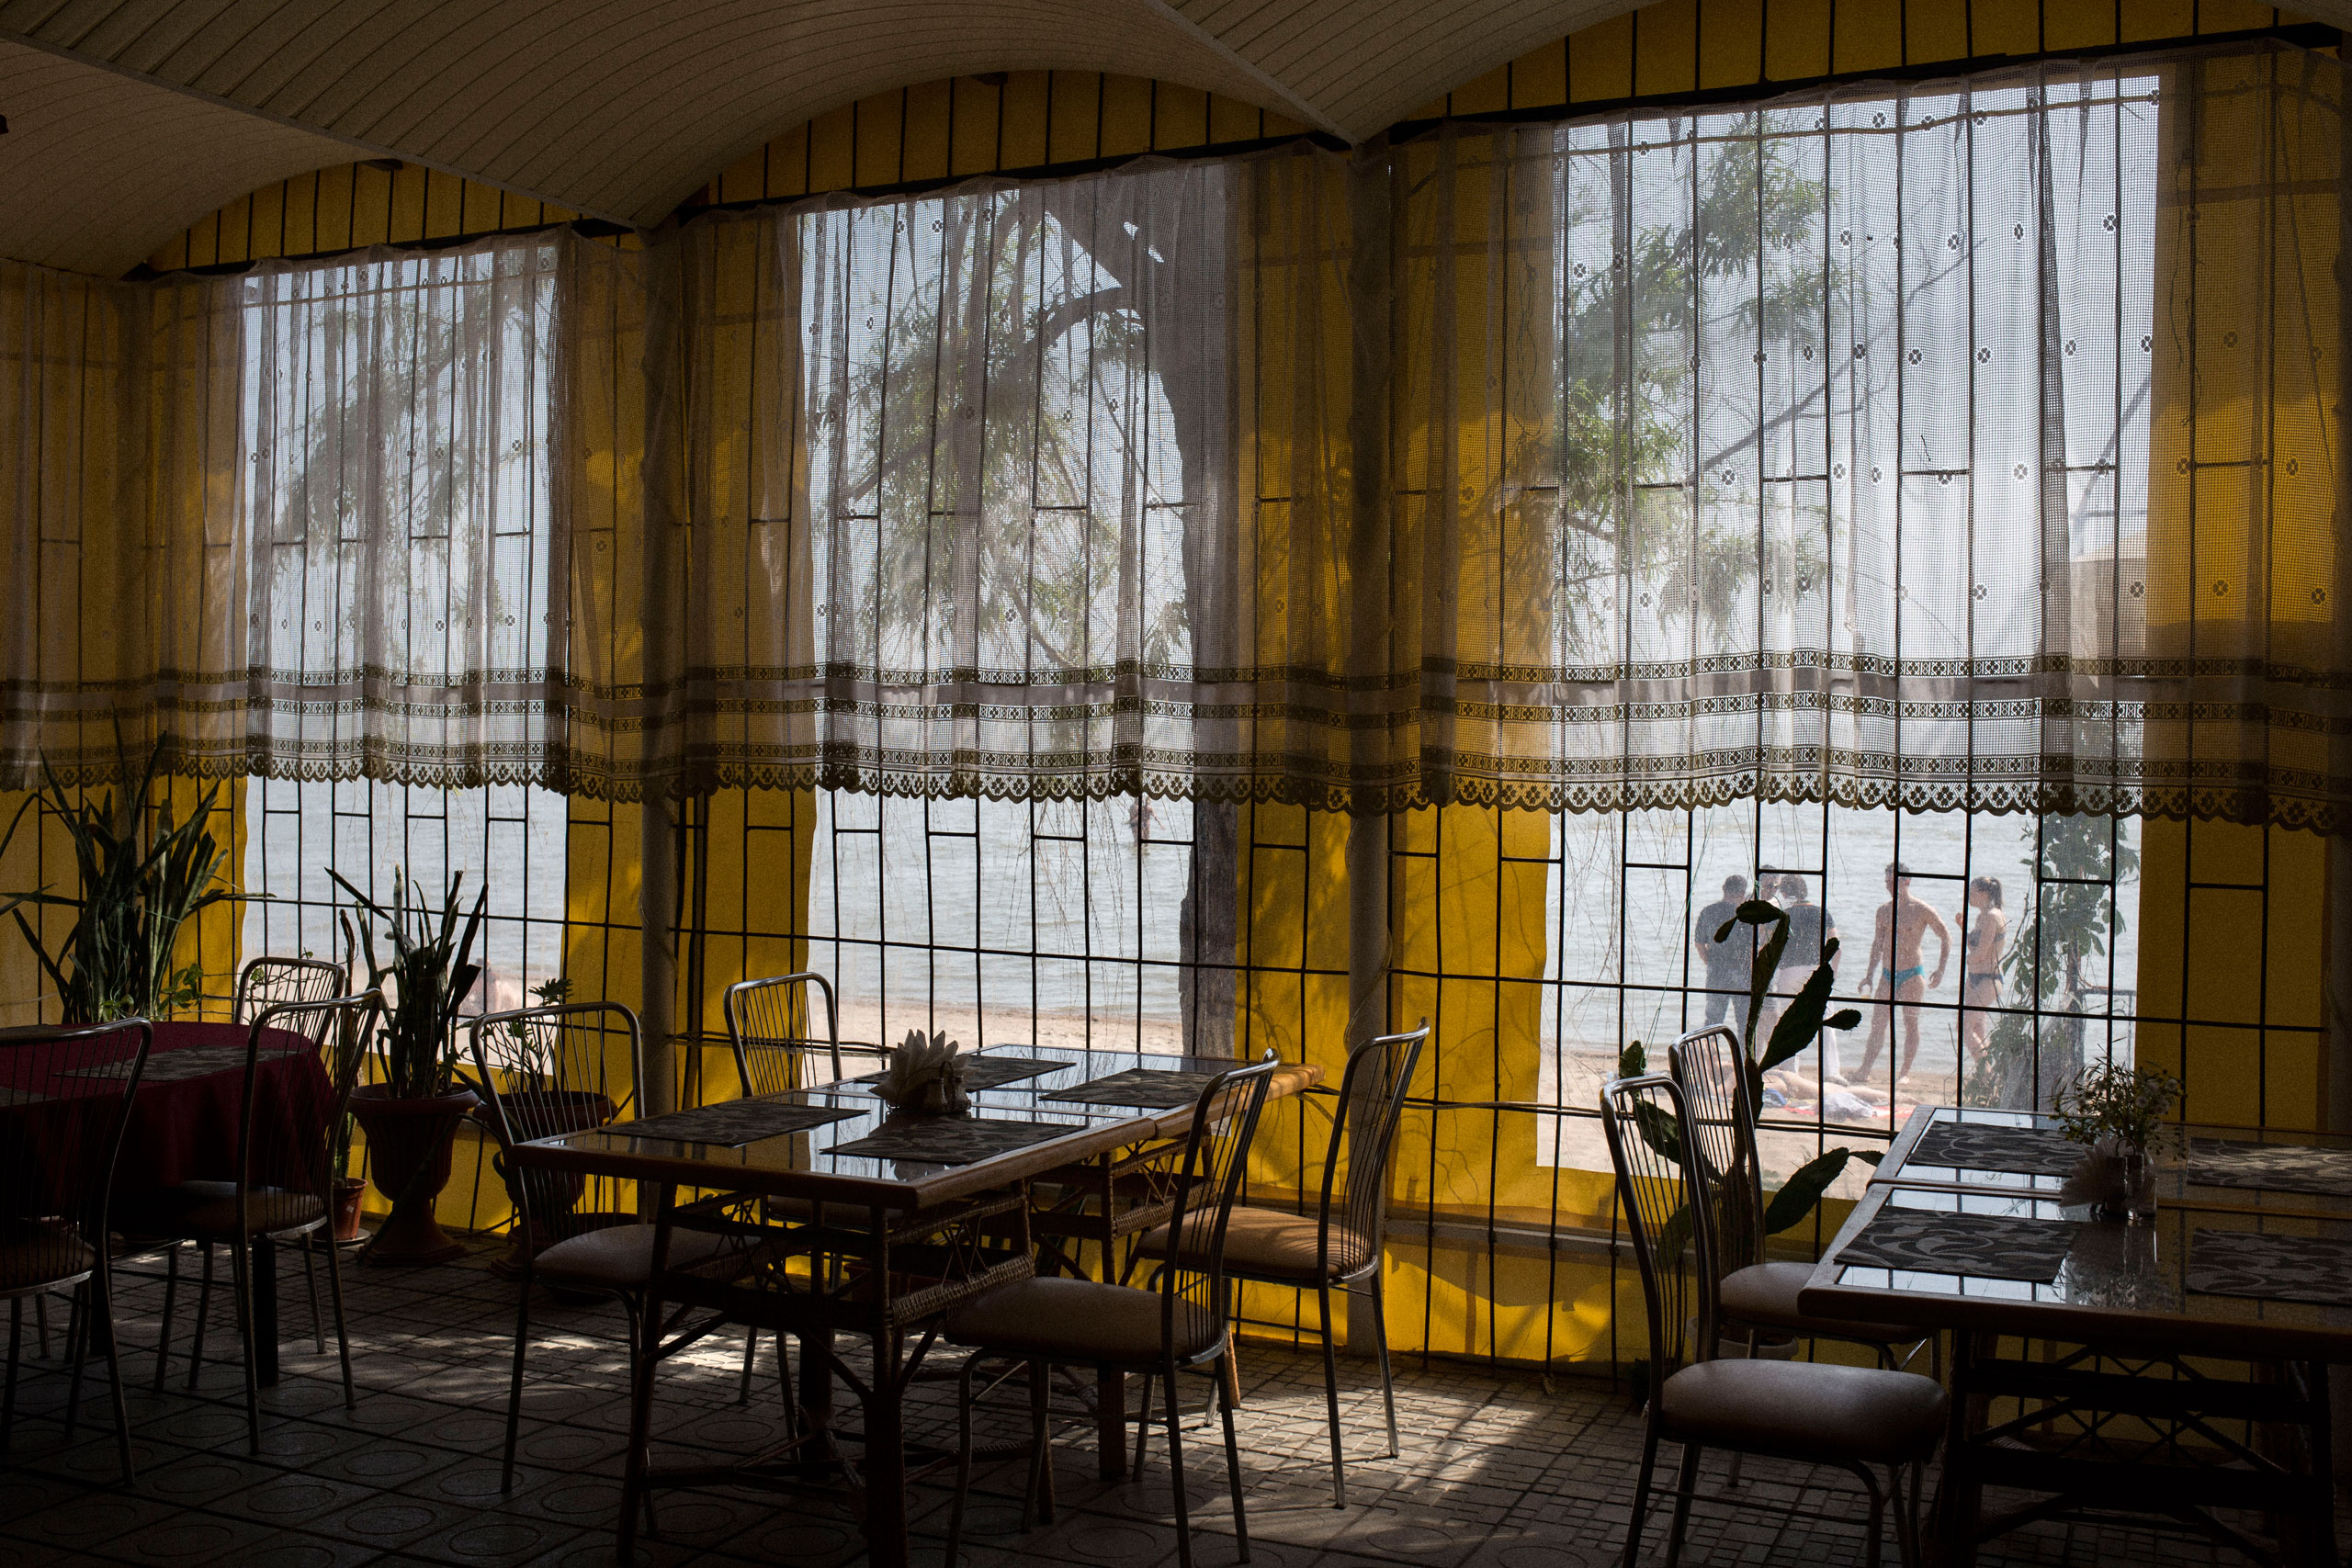 A restaurant that would otherwise be packed sites empty on the beach. Mariupol, Ukraine. May 24, 2015.